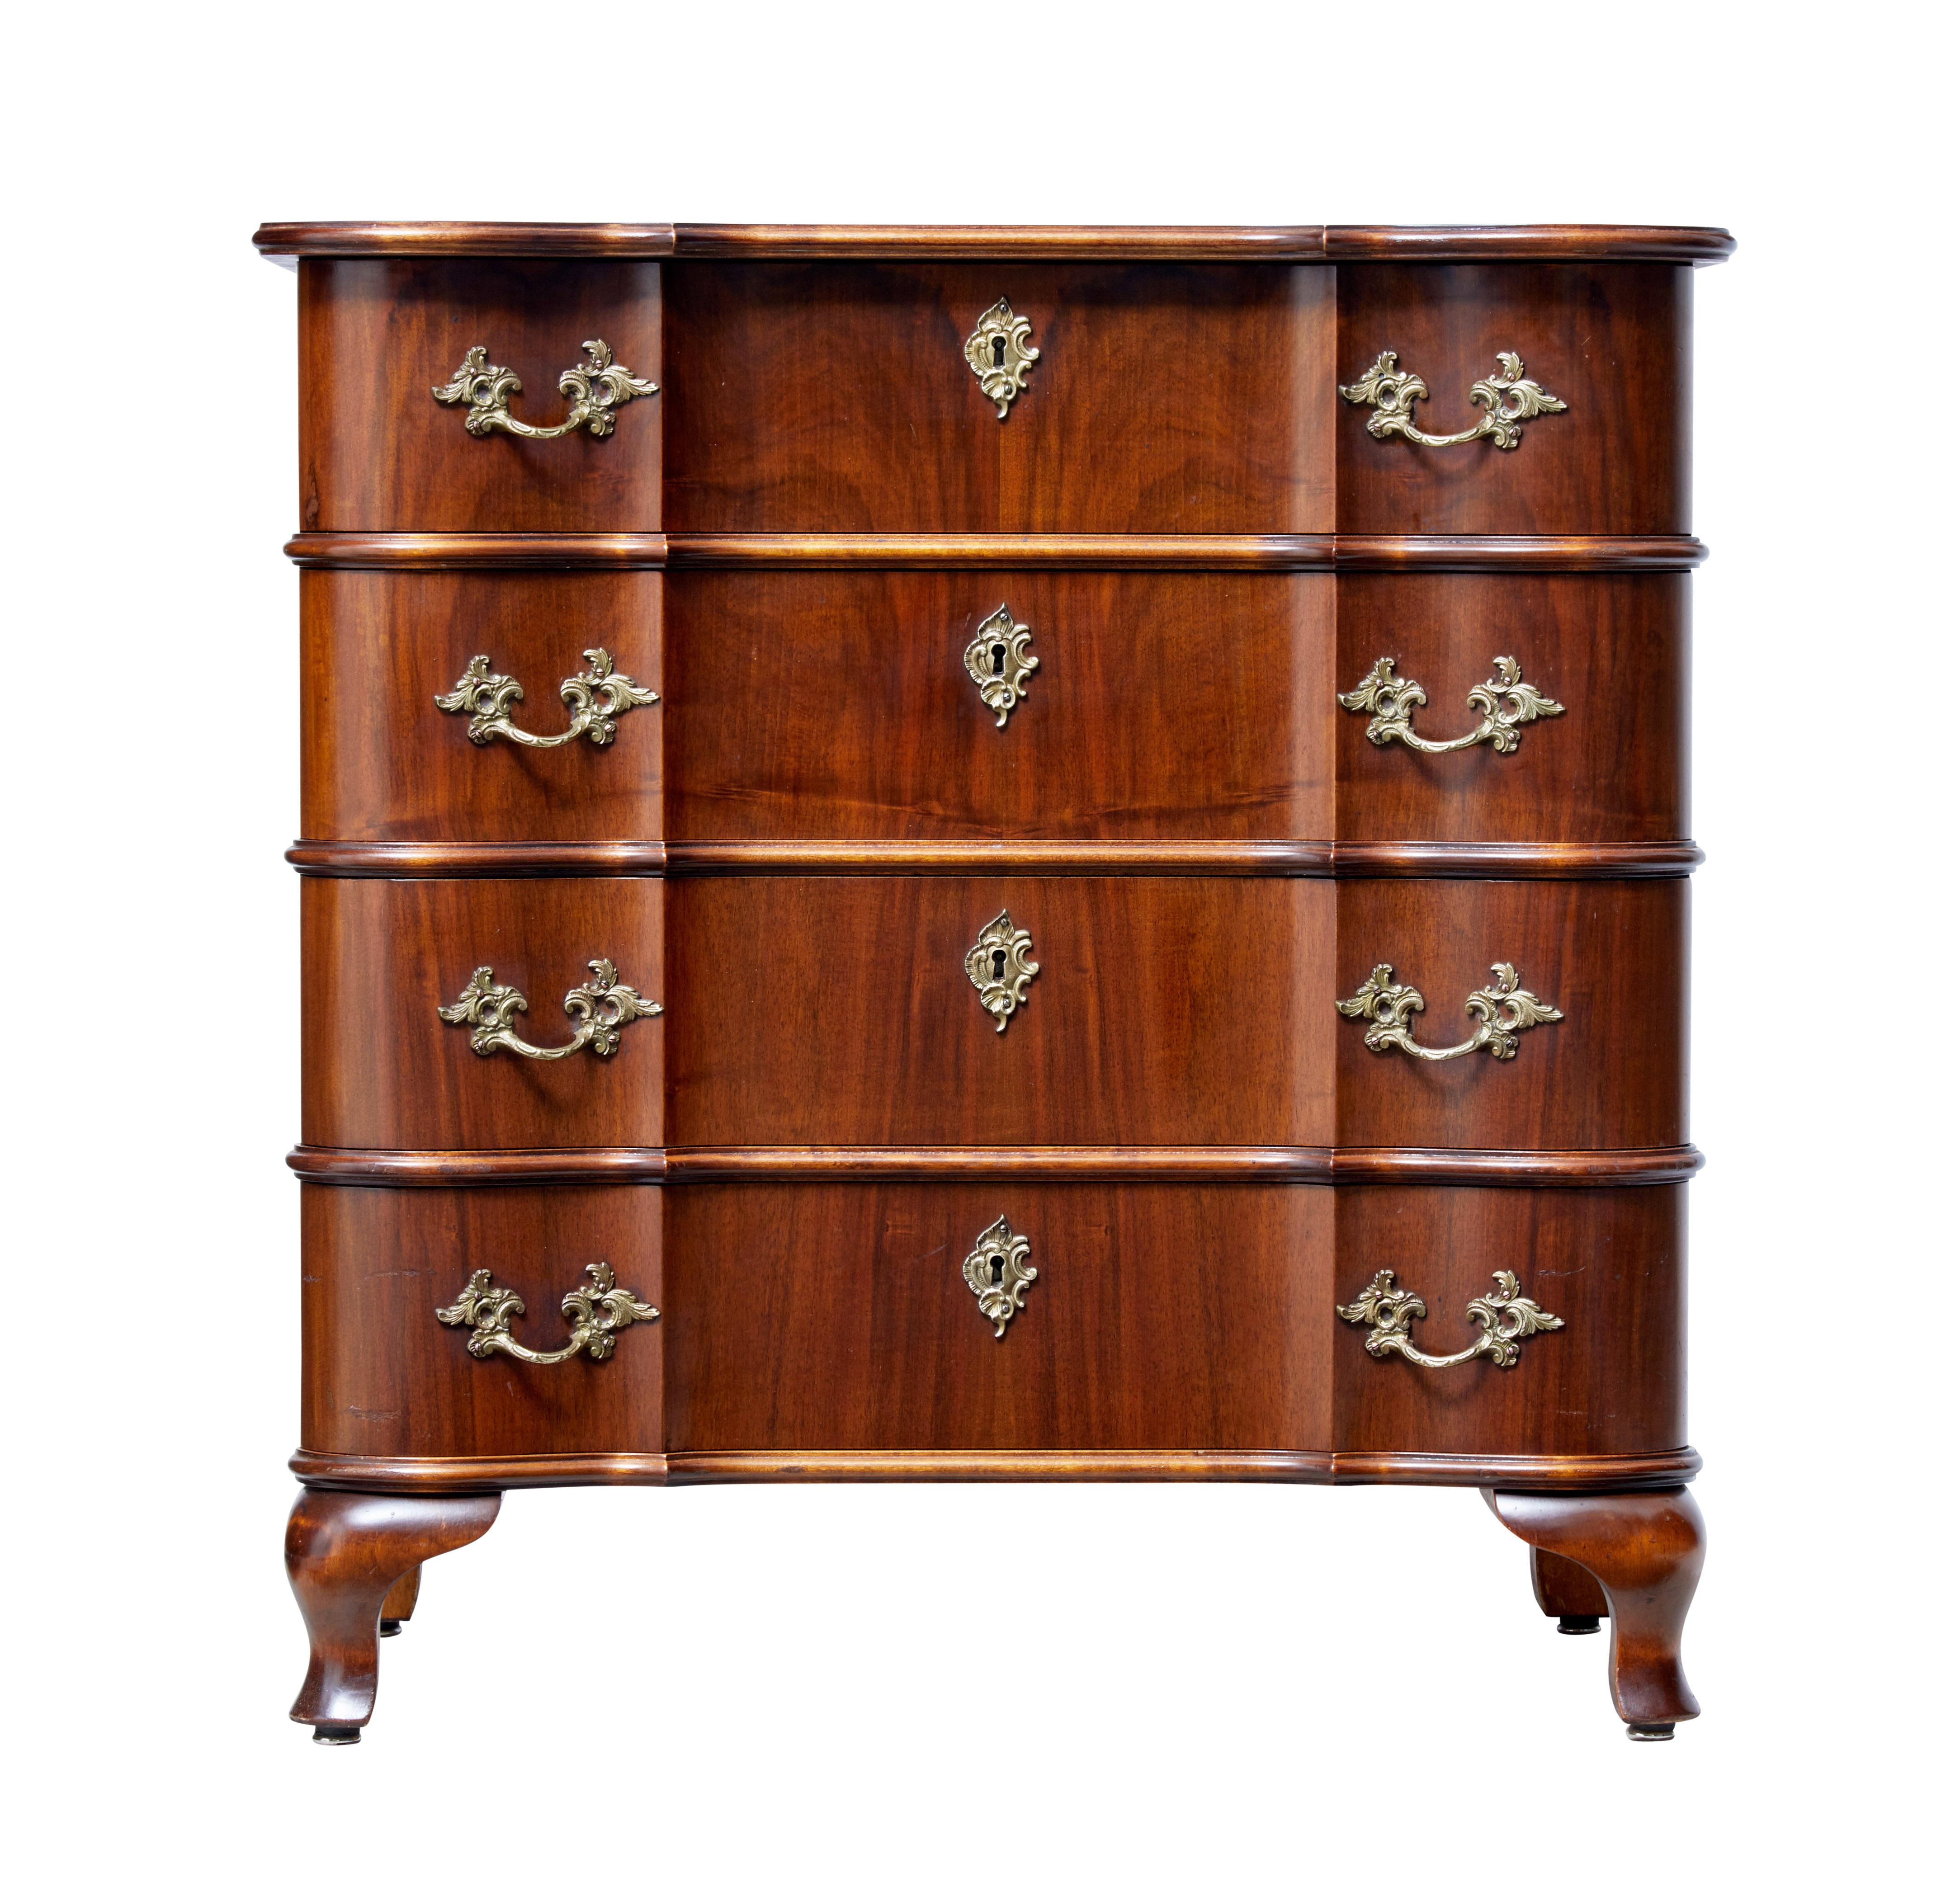 Elegant walnut commode of petit proportions, circa 1950.

Four-drawer chest with shaped drawer fronts and top. Fitted with ornate brass handles and escutheon plates.

Beautiful rich walnut color.

Minor surface marks to bottom drawer front.